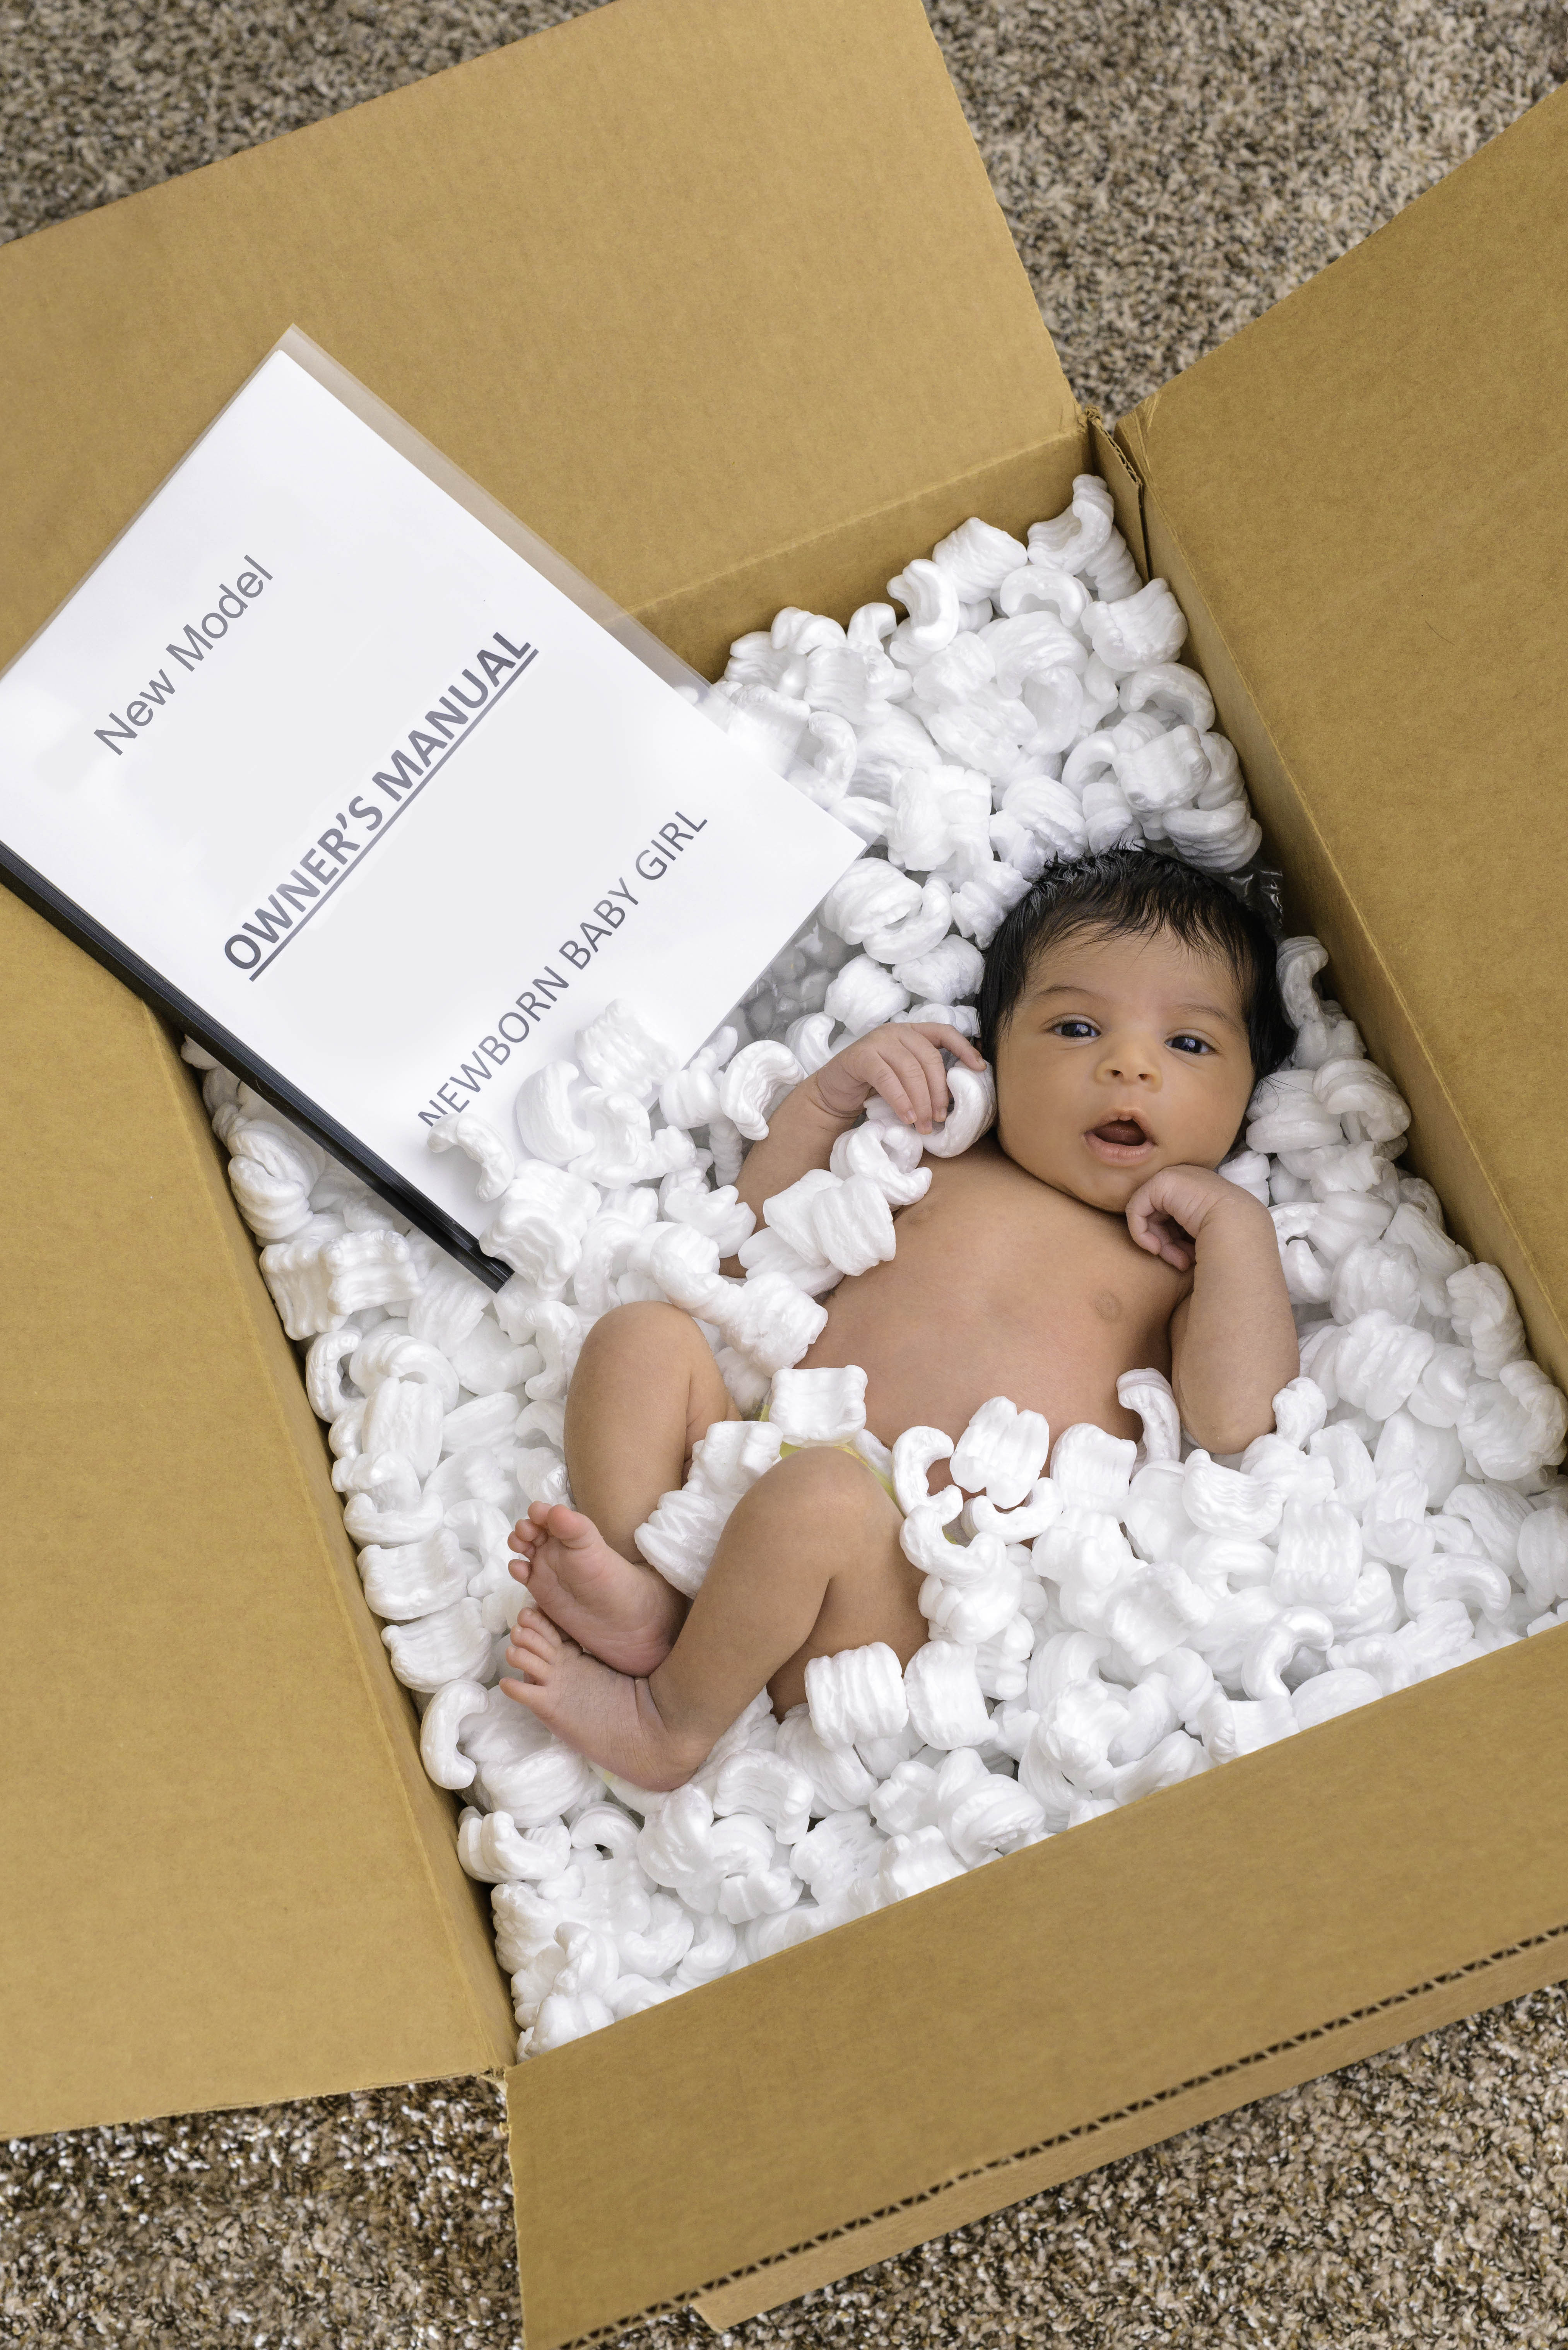 Baby in a box with packing peanuts and "Owner's Manual"